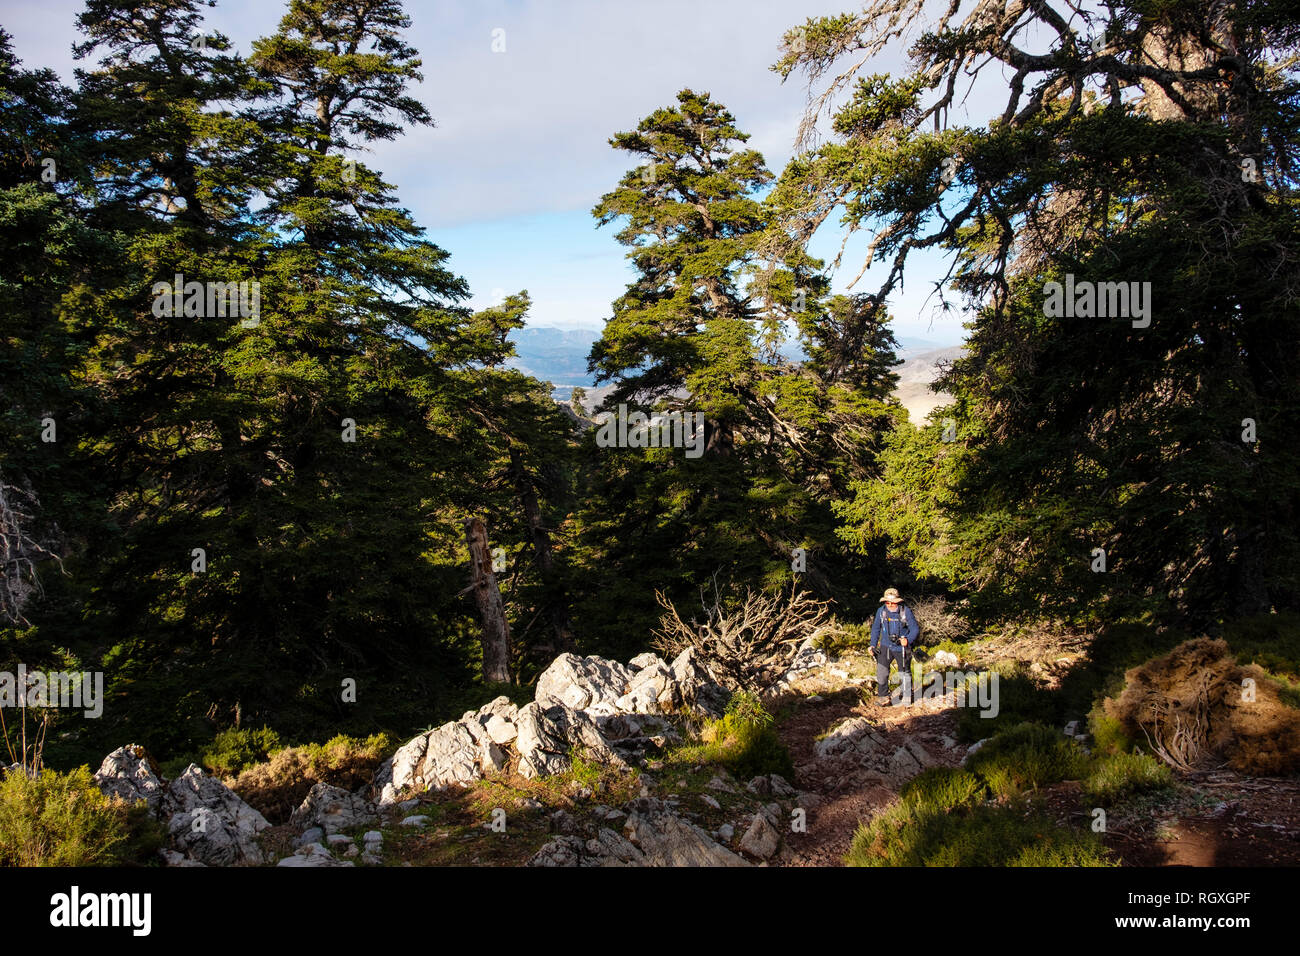 Hiking in nature. Biosphere Reserve. Natural Park Sierra de las Nieves. Spanish Fir Abies pinsapo. Ronda, Malaga province. Andalusia, Southern Spain.  Stock Photo